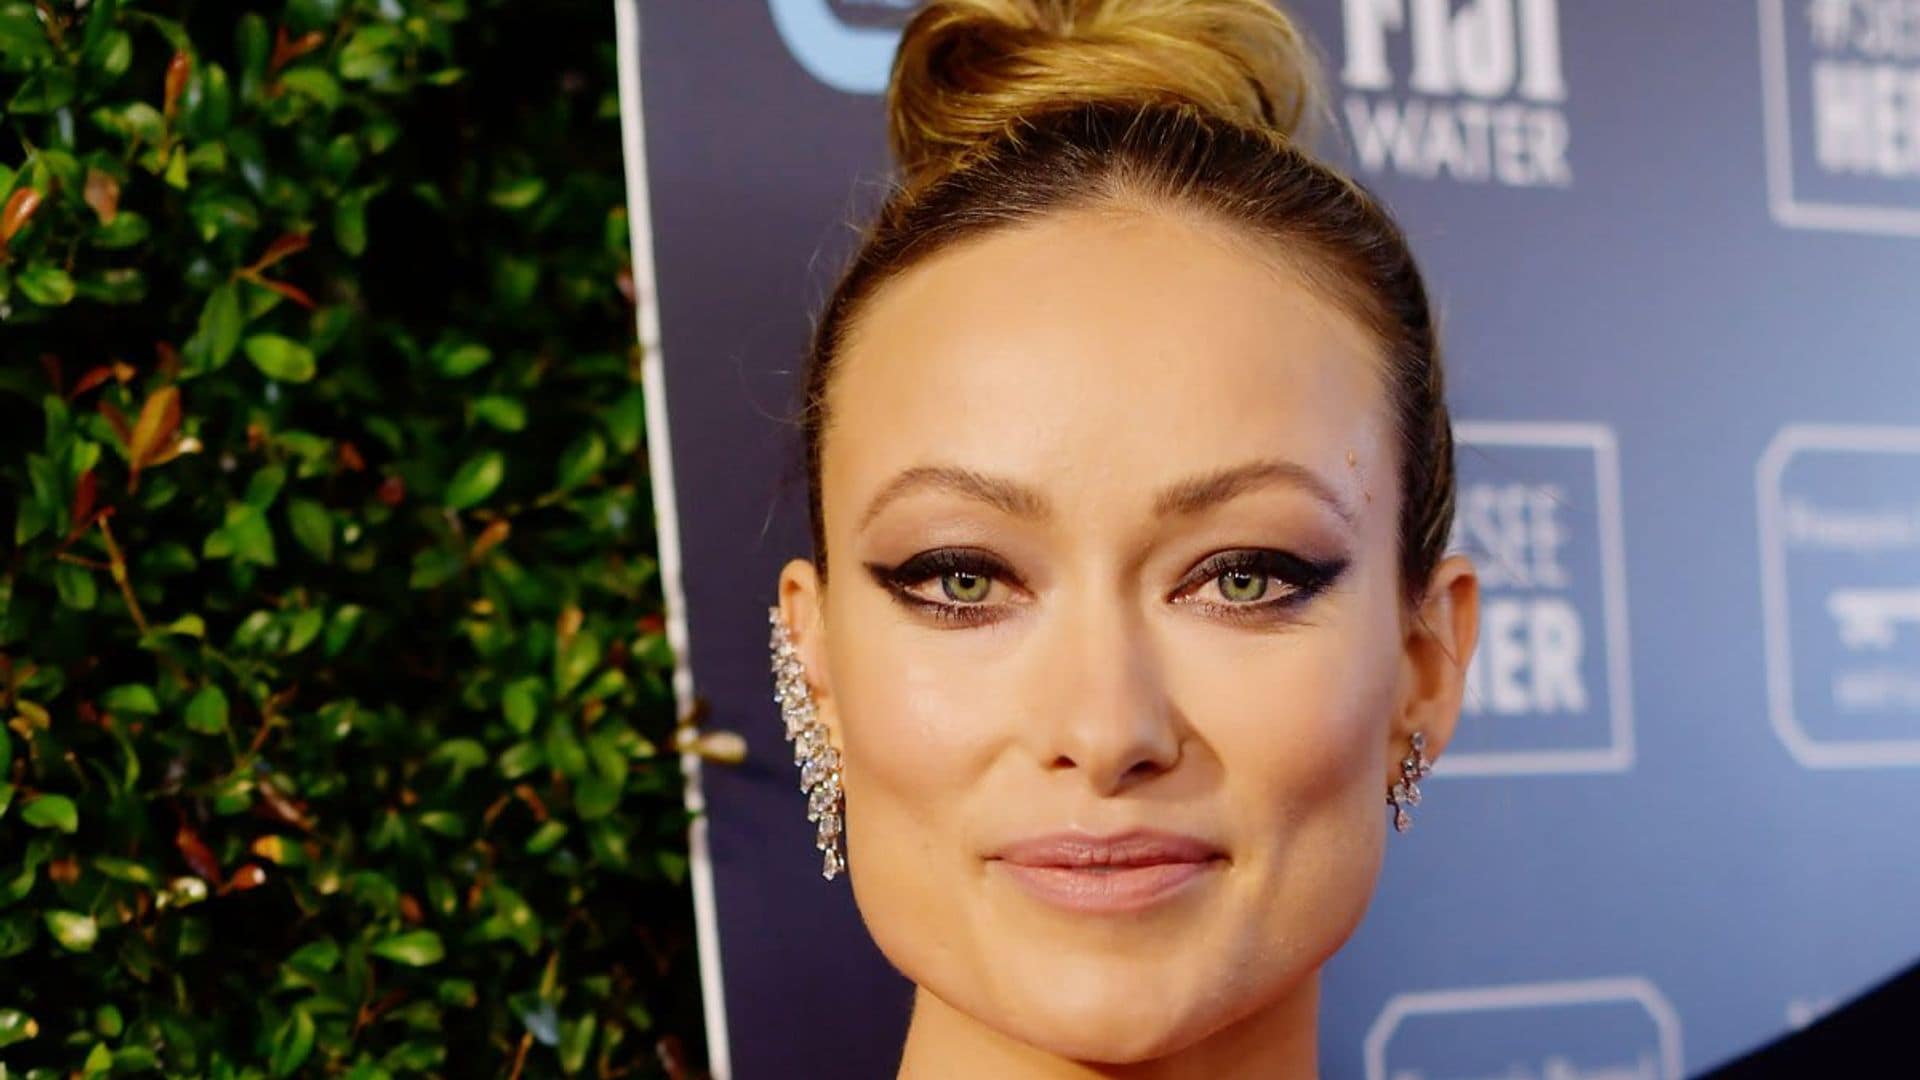 Olivia Wilde shared a rare photo of her son and daughter enjoying a boat ride